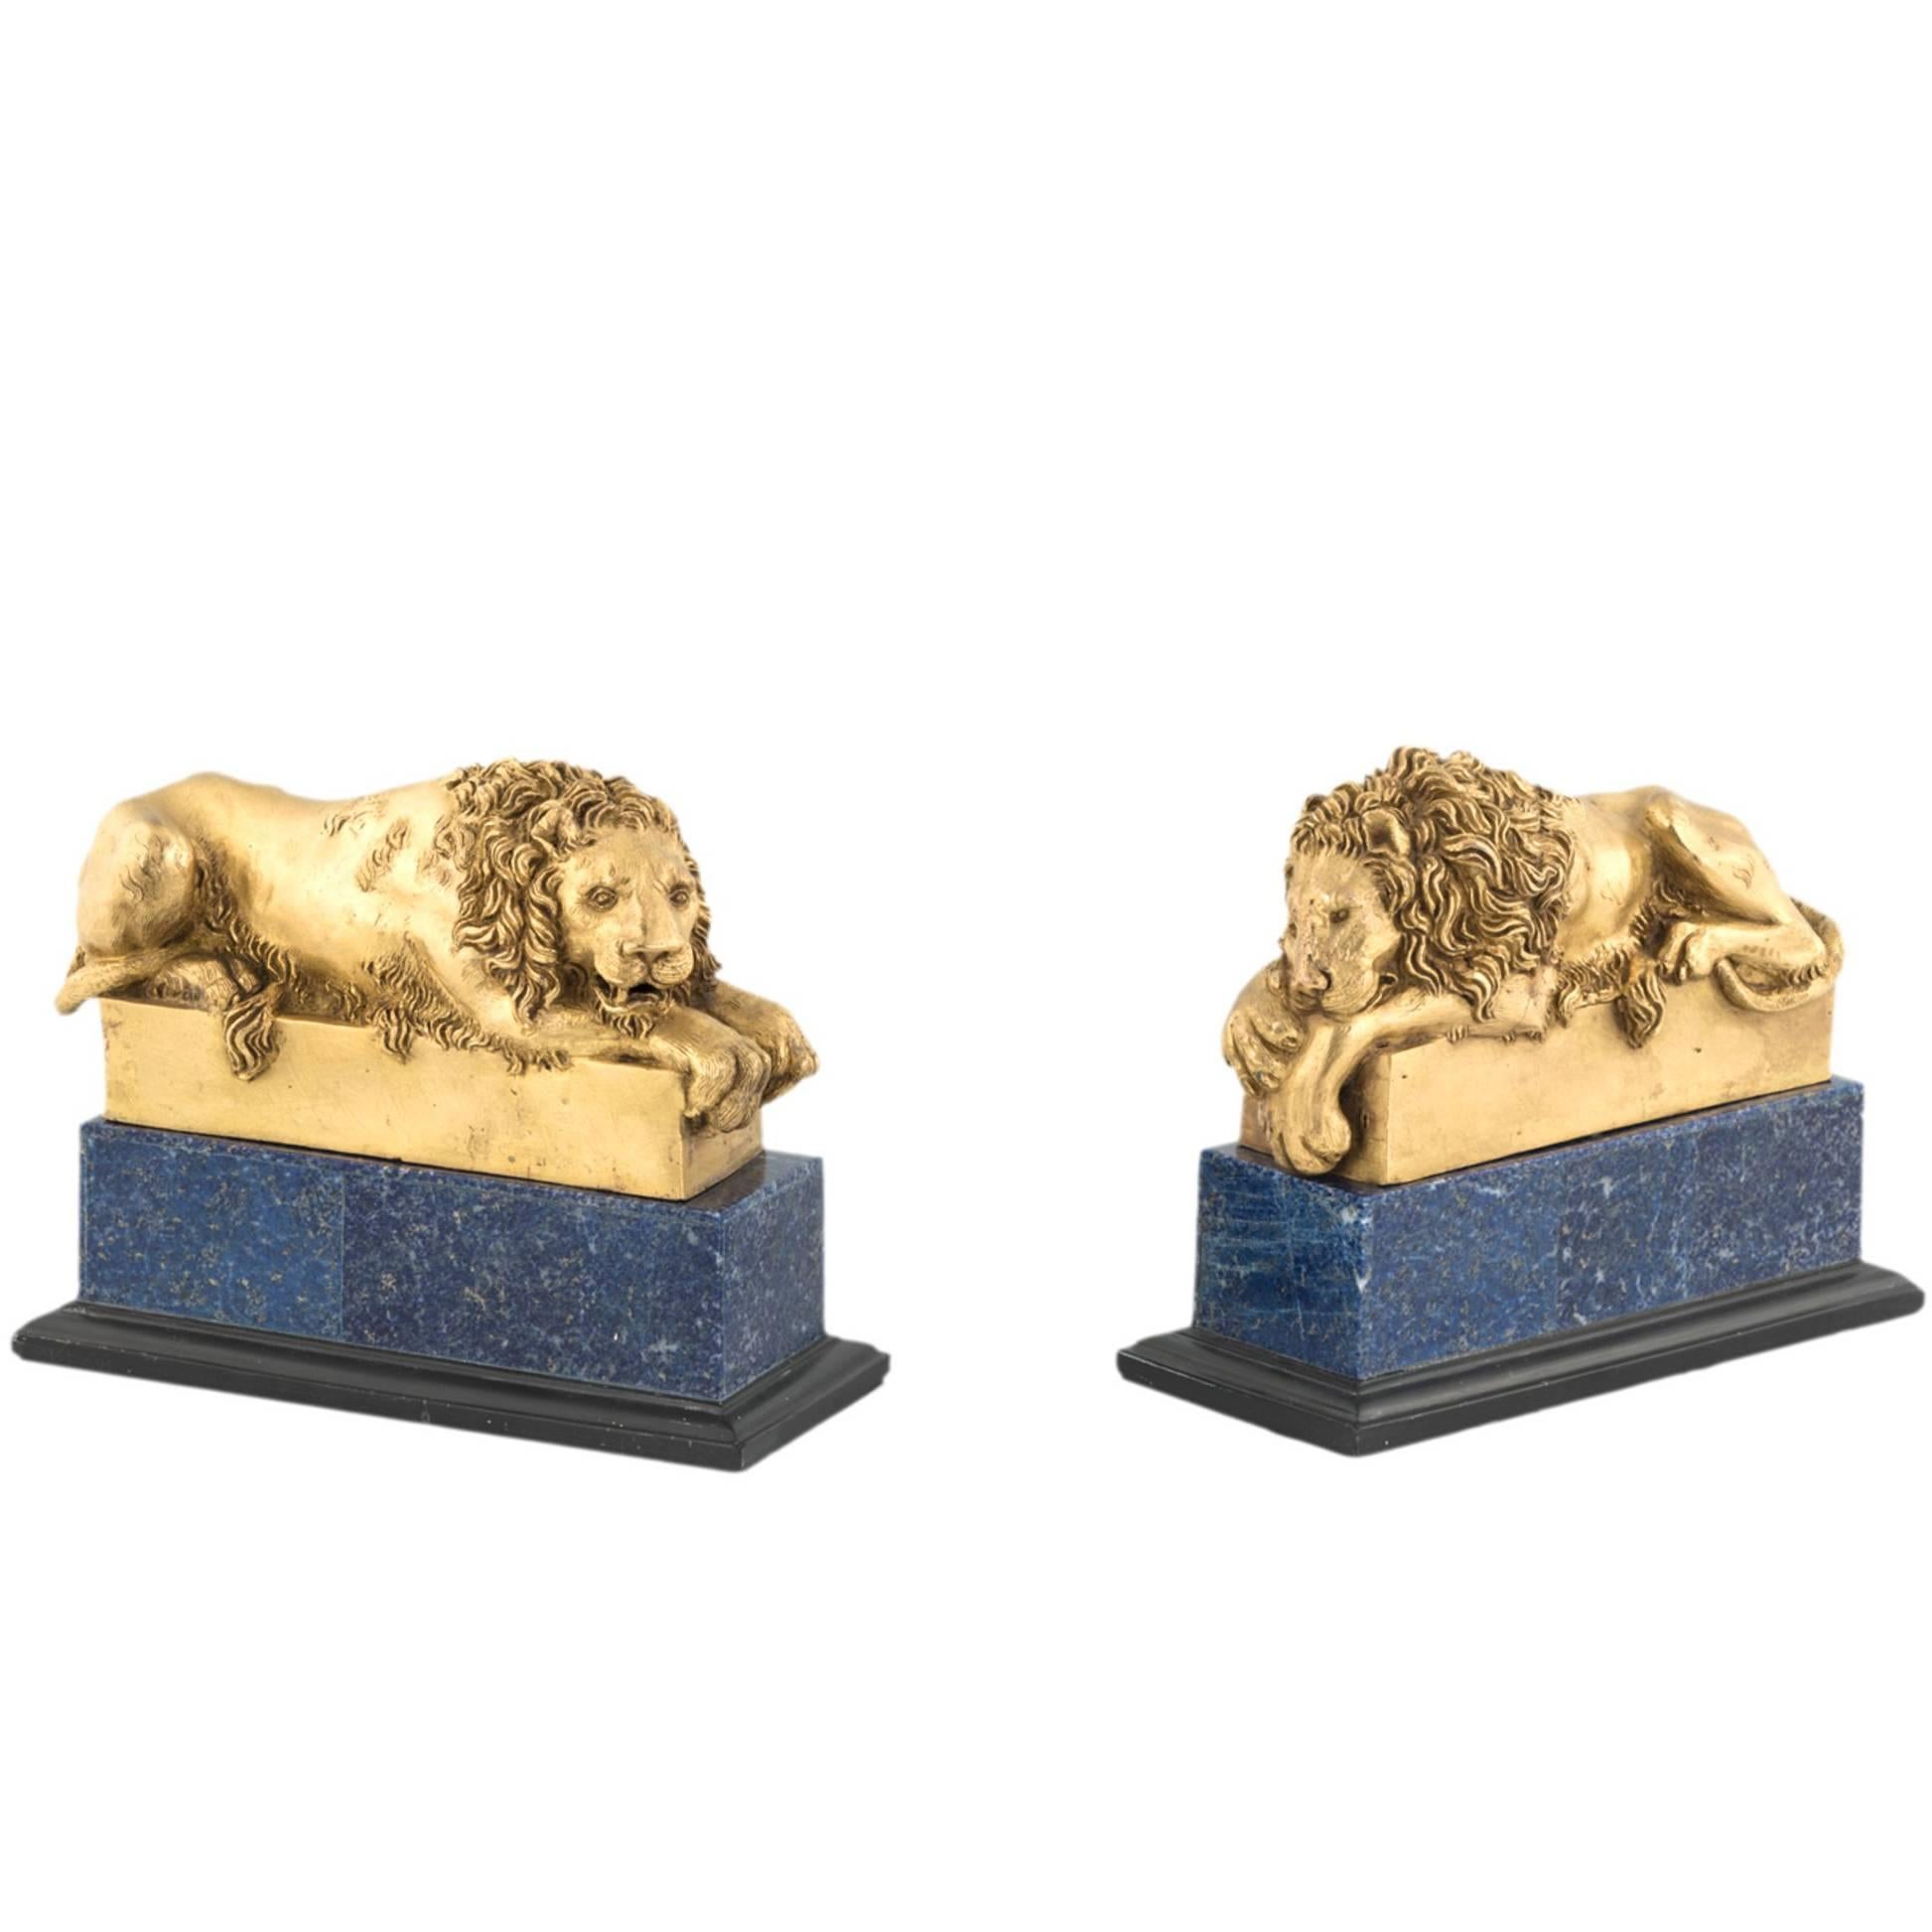 19th Century Pair of Canova Lions in Bronze and Lapis Lazzulo